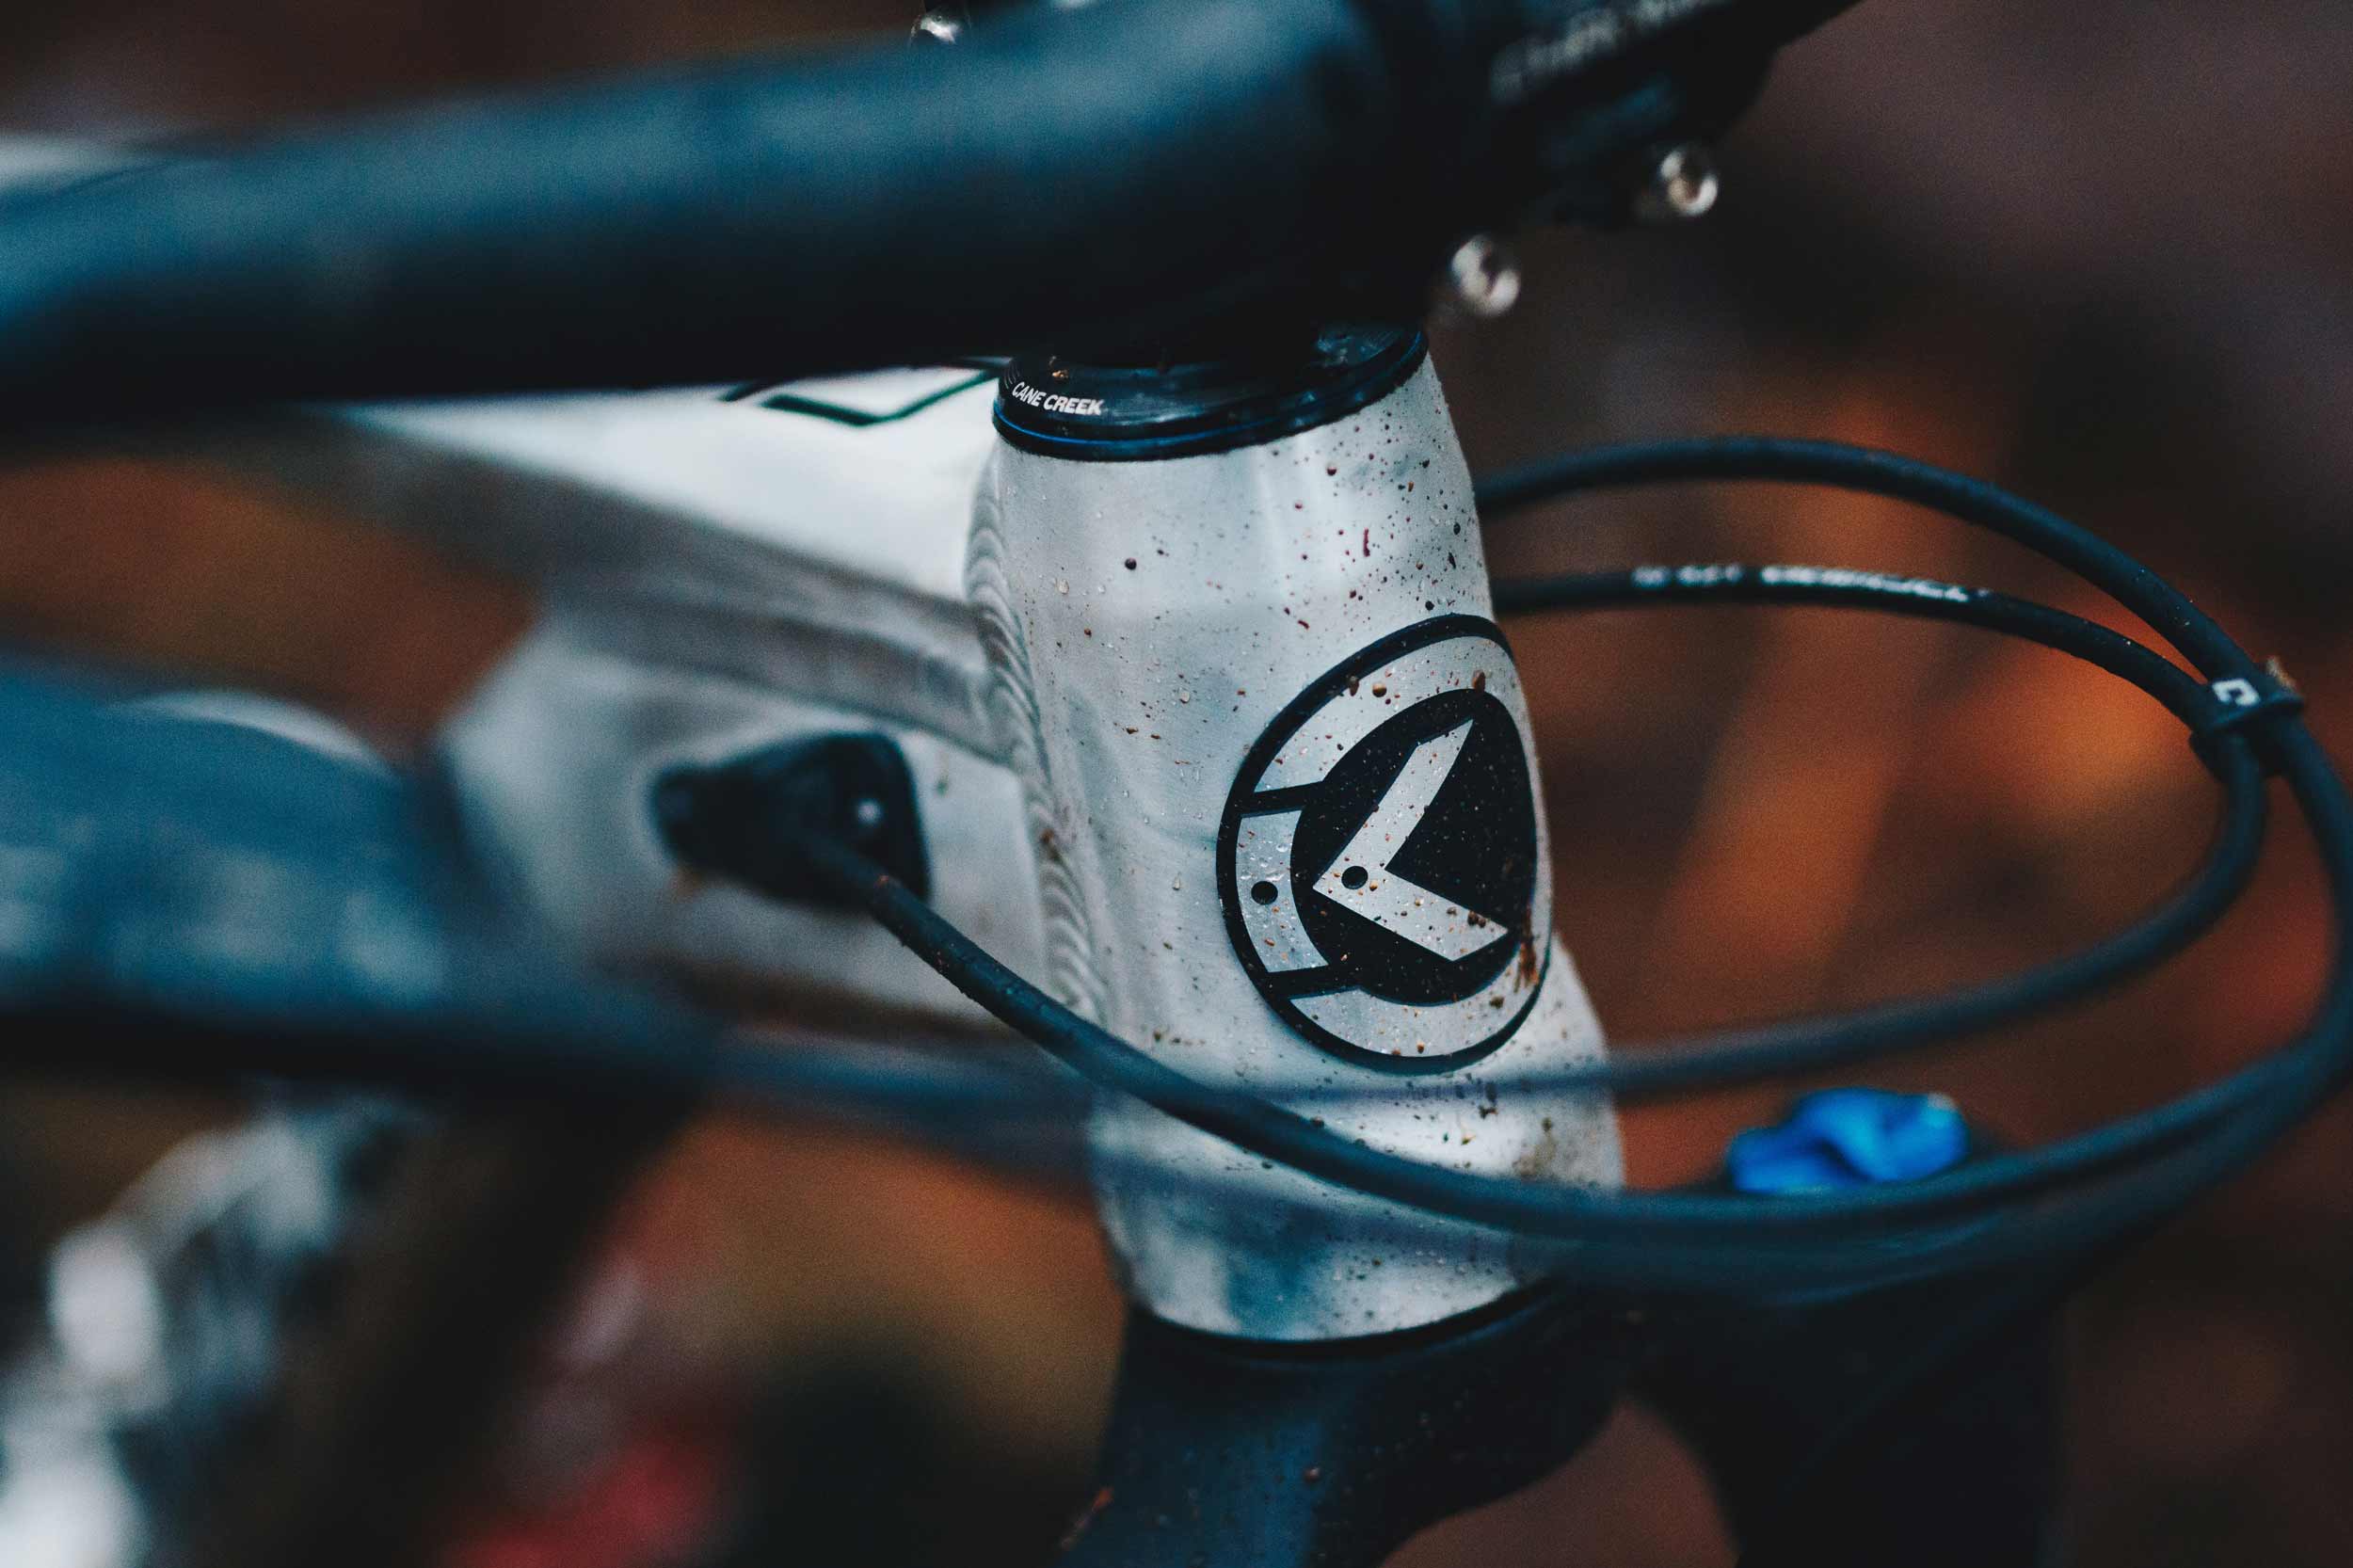 Cable Guide - Triple Line - Bolt On – Knolly Bikes